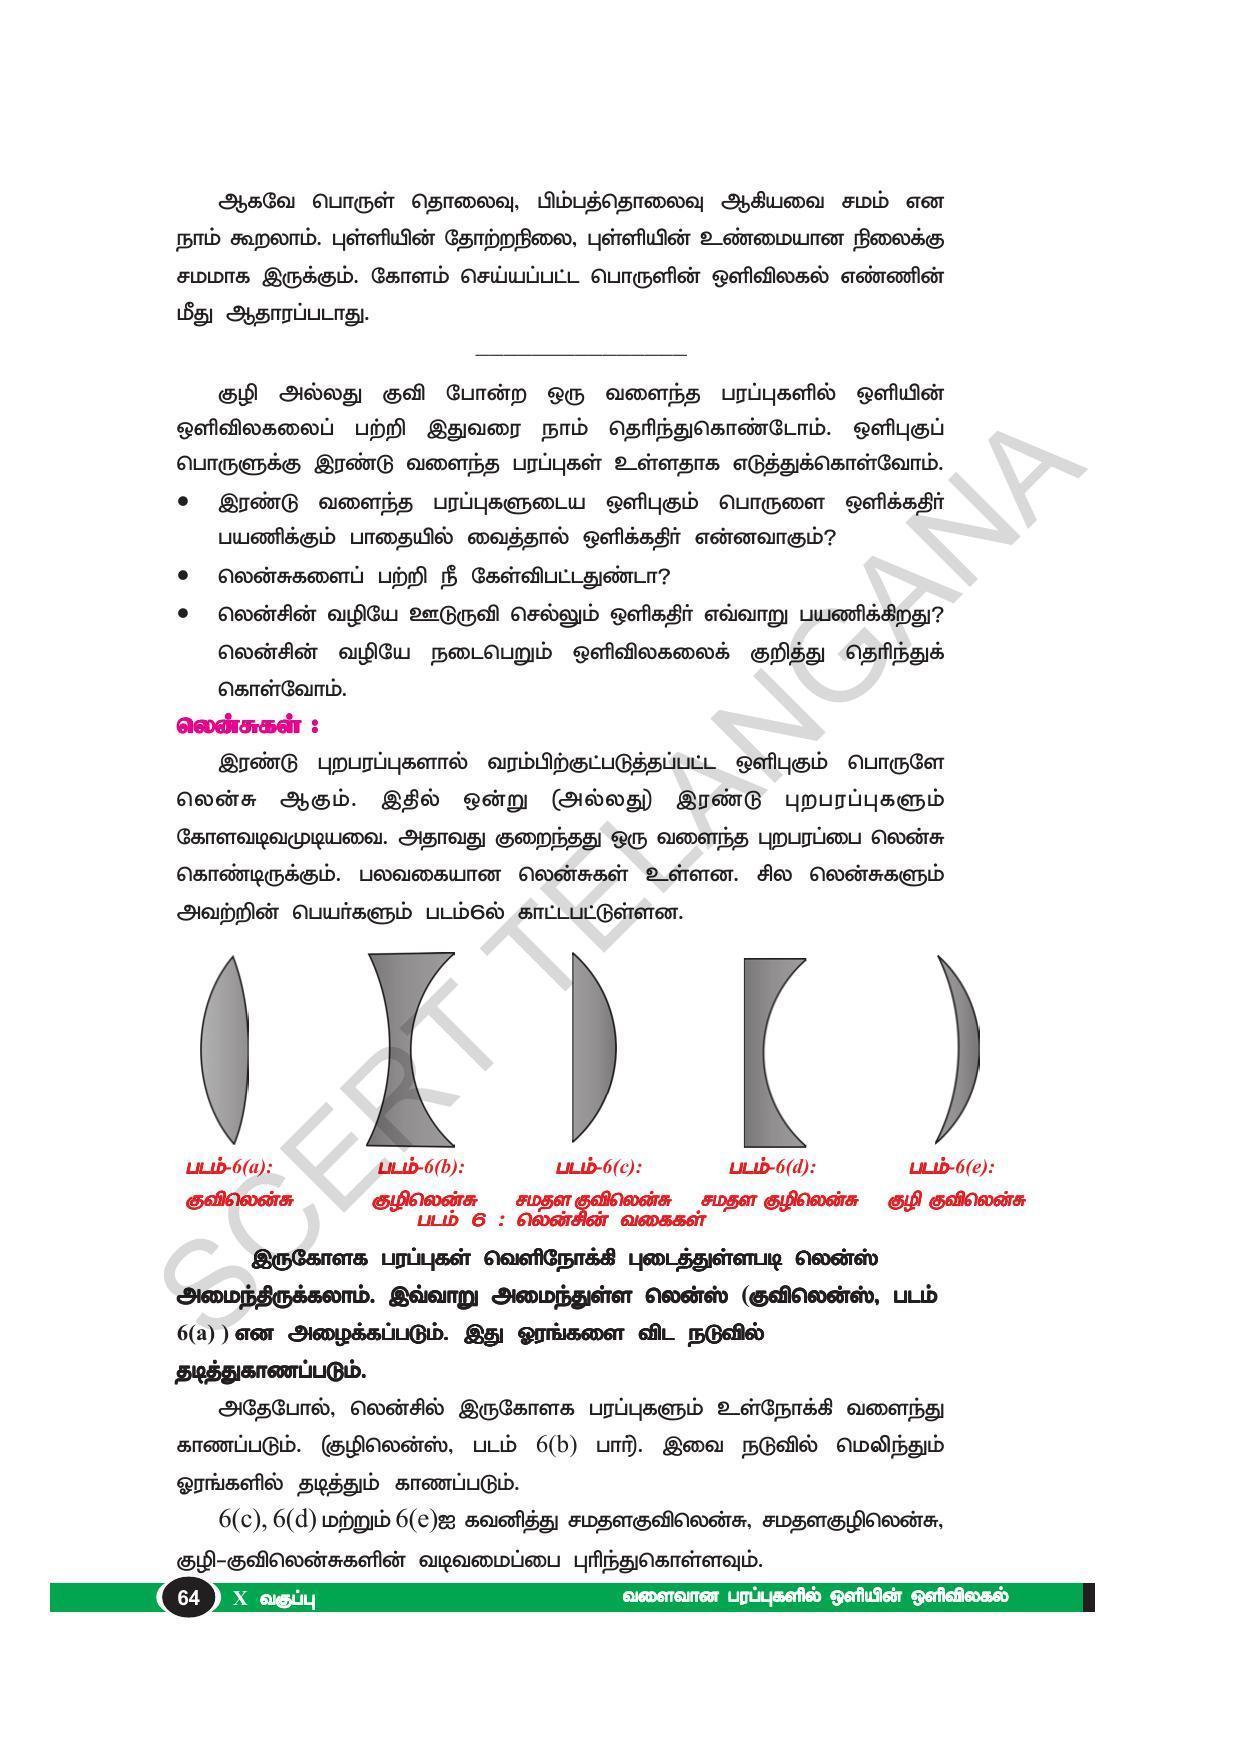 TS SCERT Class 10 Physical Science(Tamil Medium) Text Book - Page 76